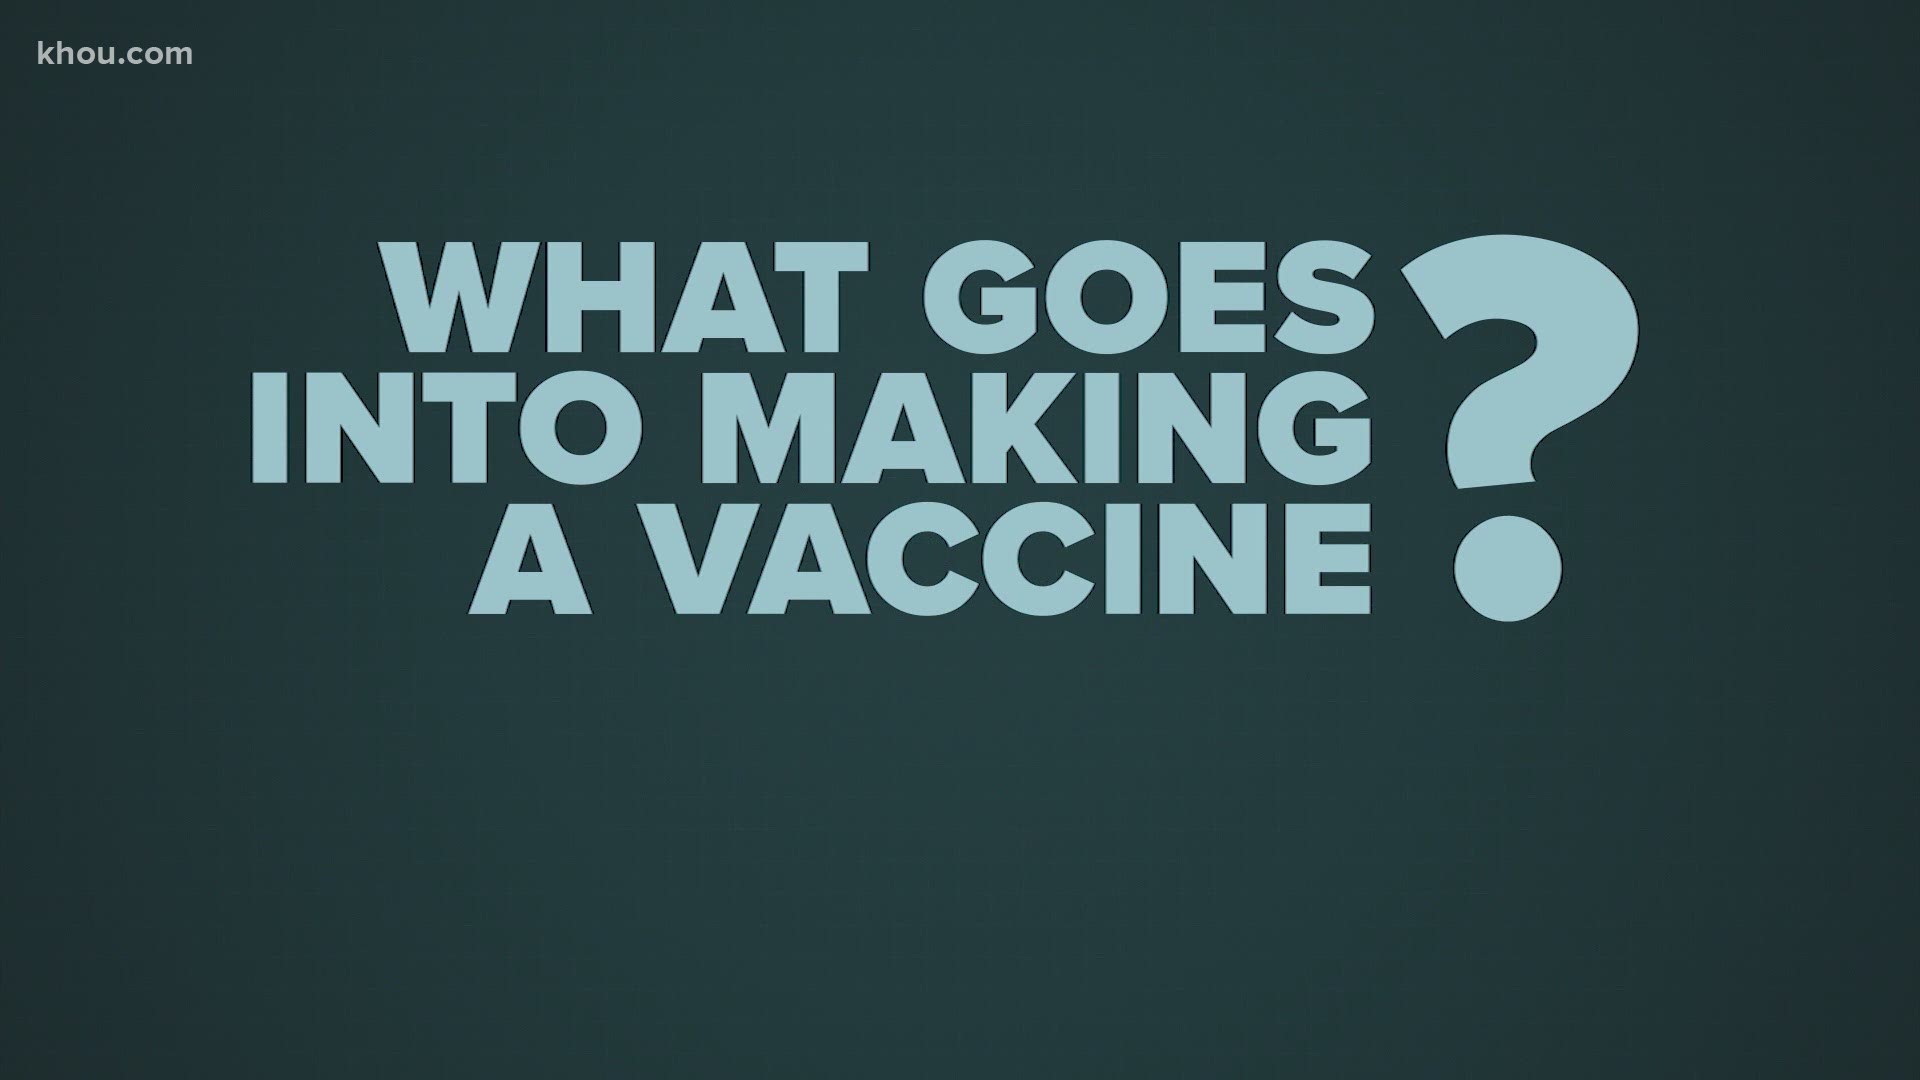 Labs are working at warp speed to create a vaccine. It usually takes years, but the president wants a vaccine by December. Here's why the process takes so long.